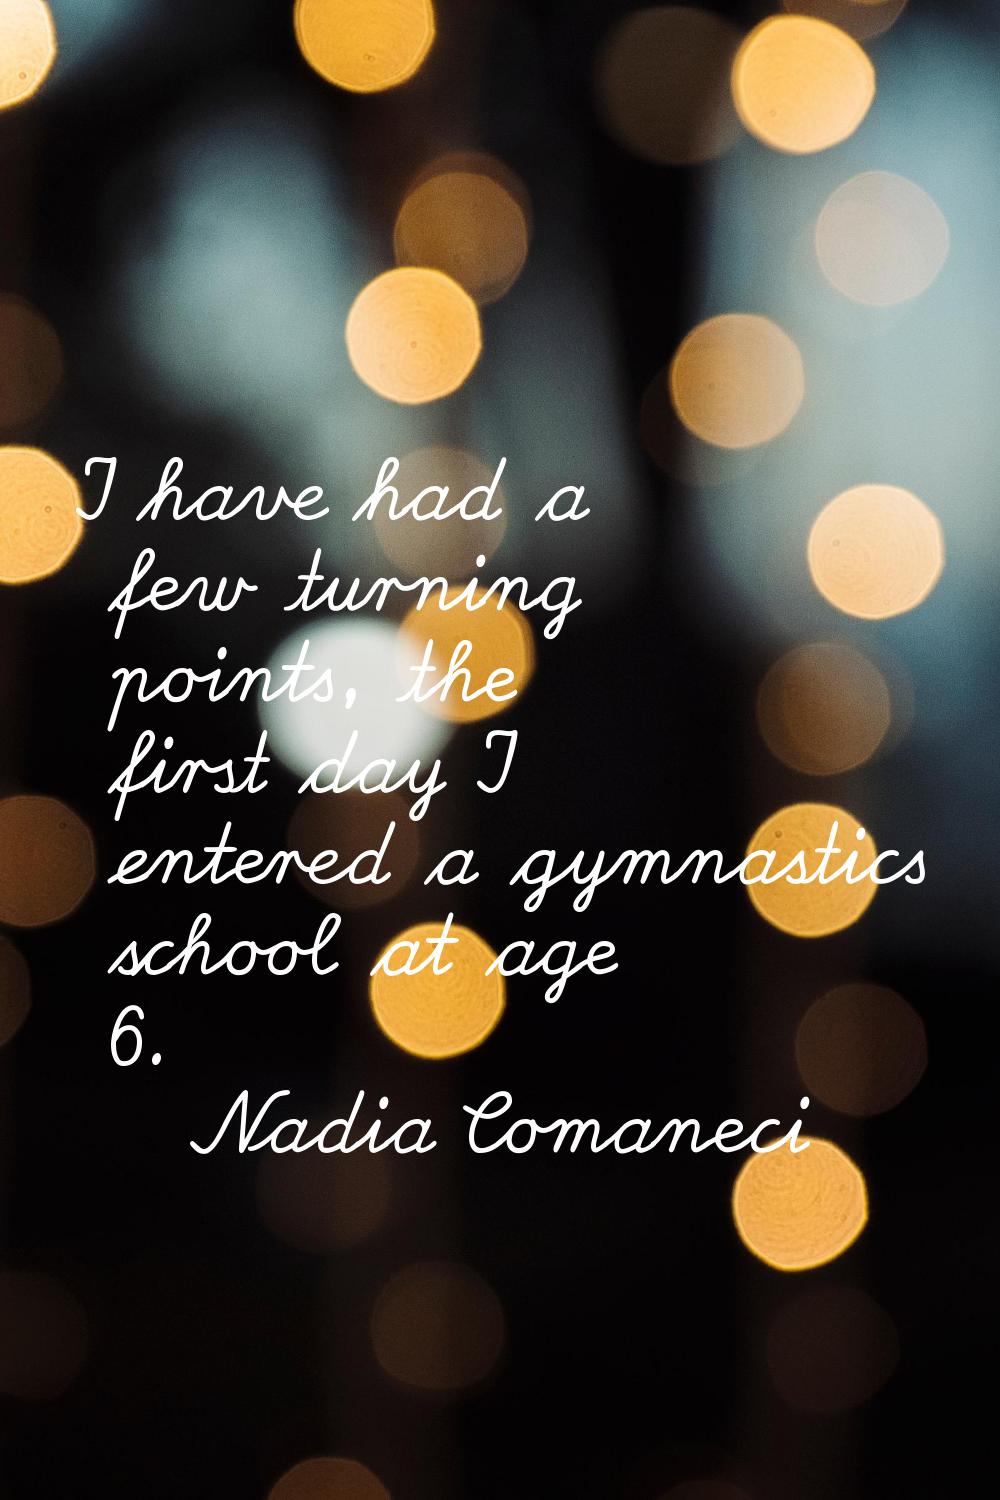 I have had a few turning points, the first day I entered a gymnastics school at age 6.